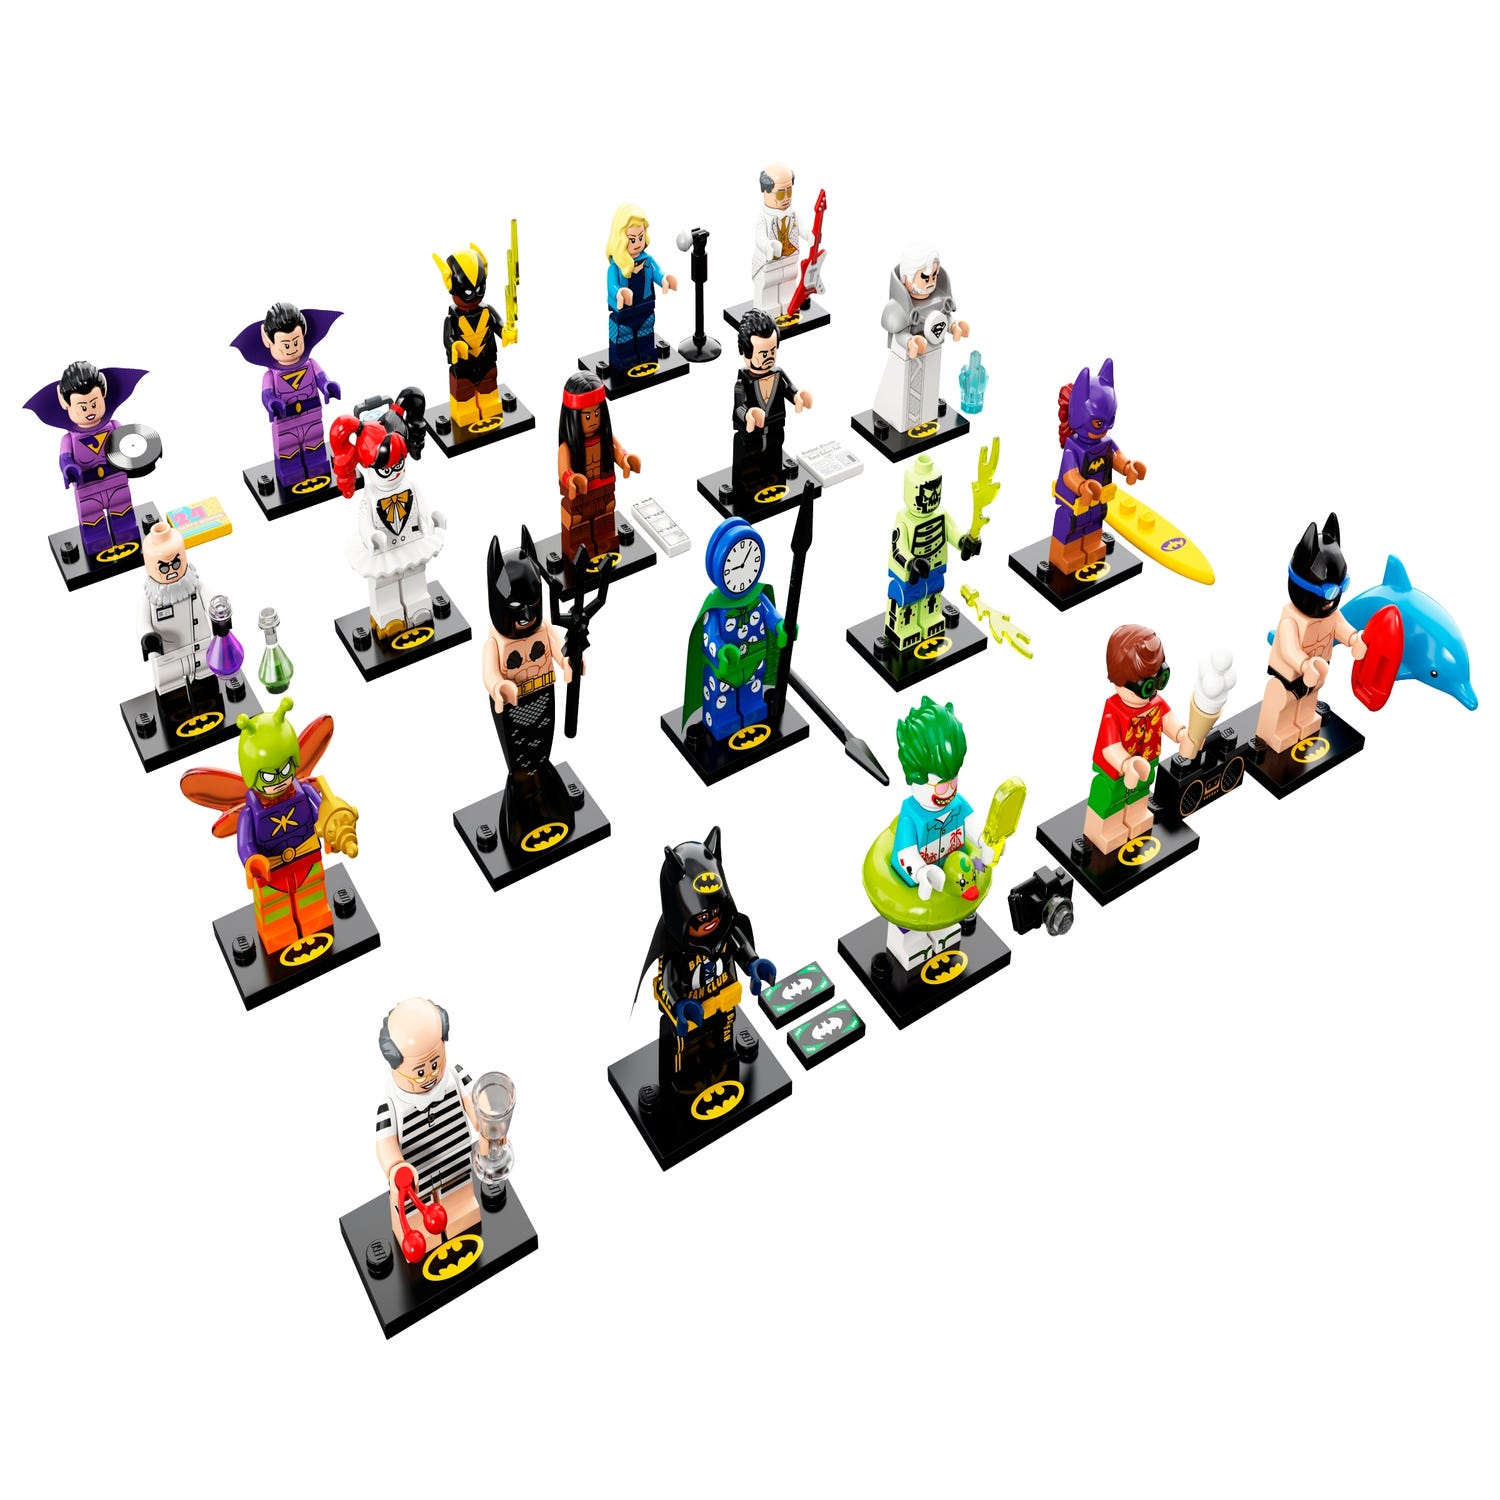 Panorama Meget rart godt Gentage sig THE LEGO® BATMAN MOVIE Series 2 71020 | Minifigures | Buy online at the  Official LEGO® Shop US